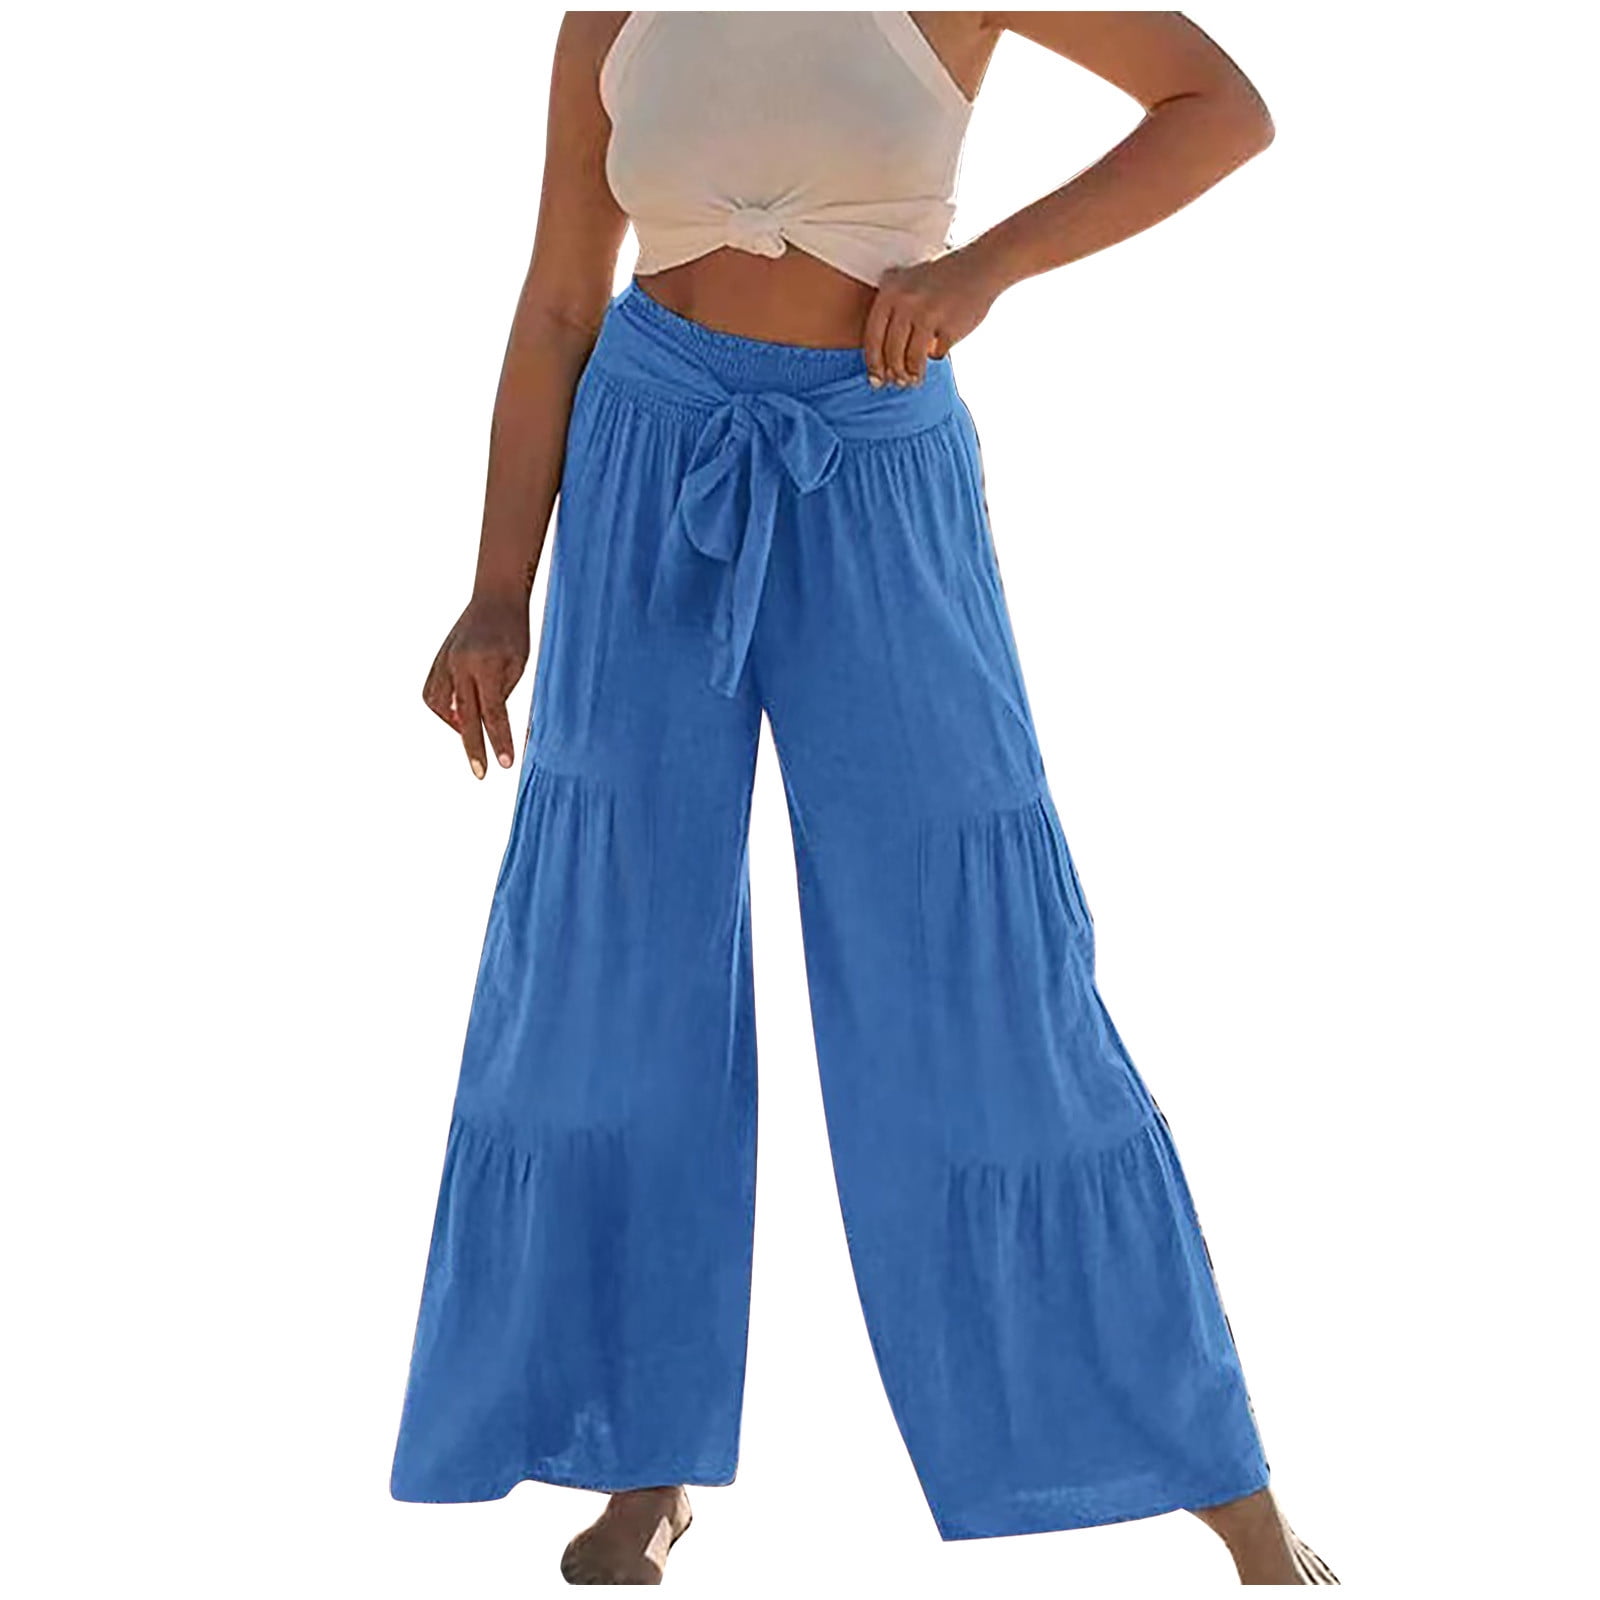 NILLLY Palazzo Pants for Women Haren Casual Loose Ankle-Length Comfortable  Fashion Elasticity Solid Color Pants Ladies Pants Light blue / S 